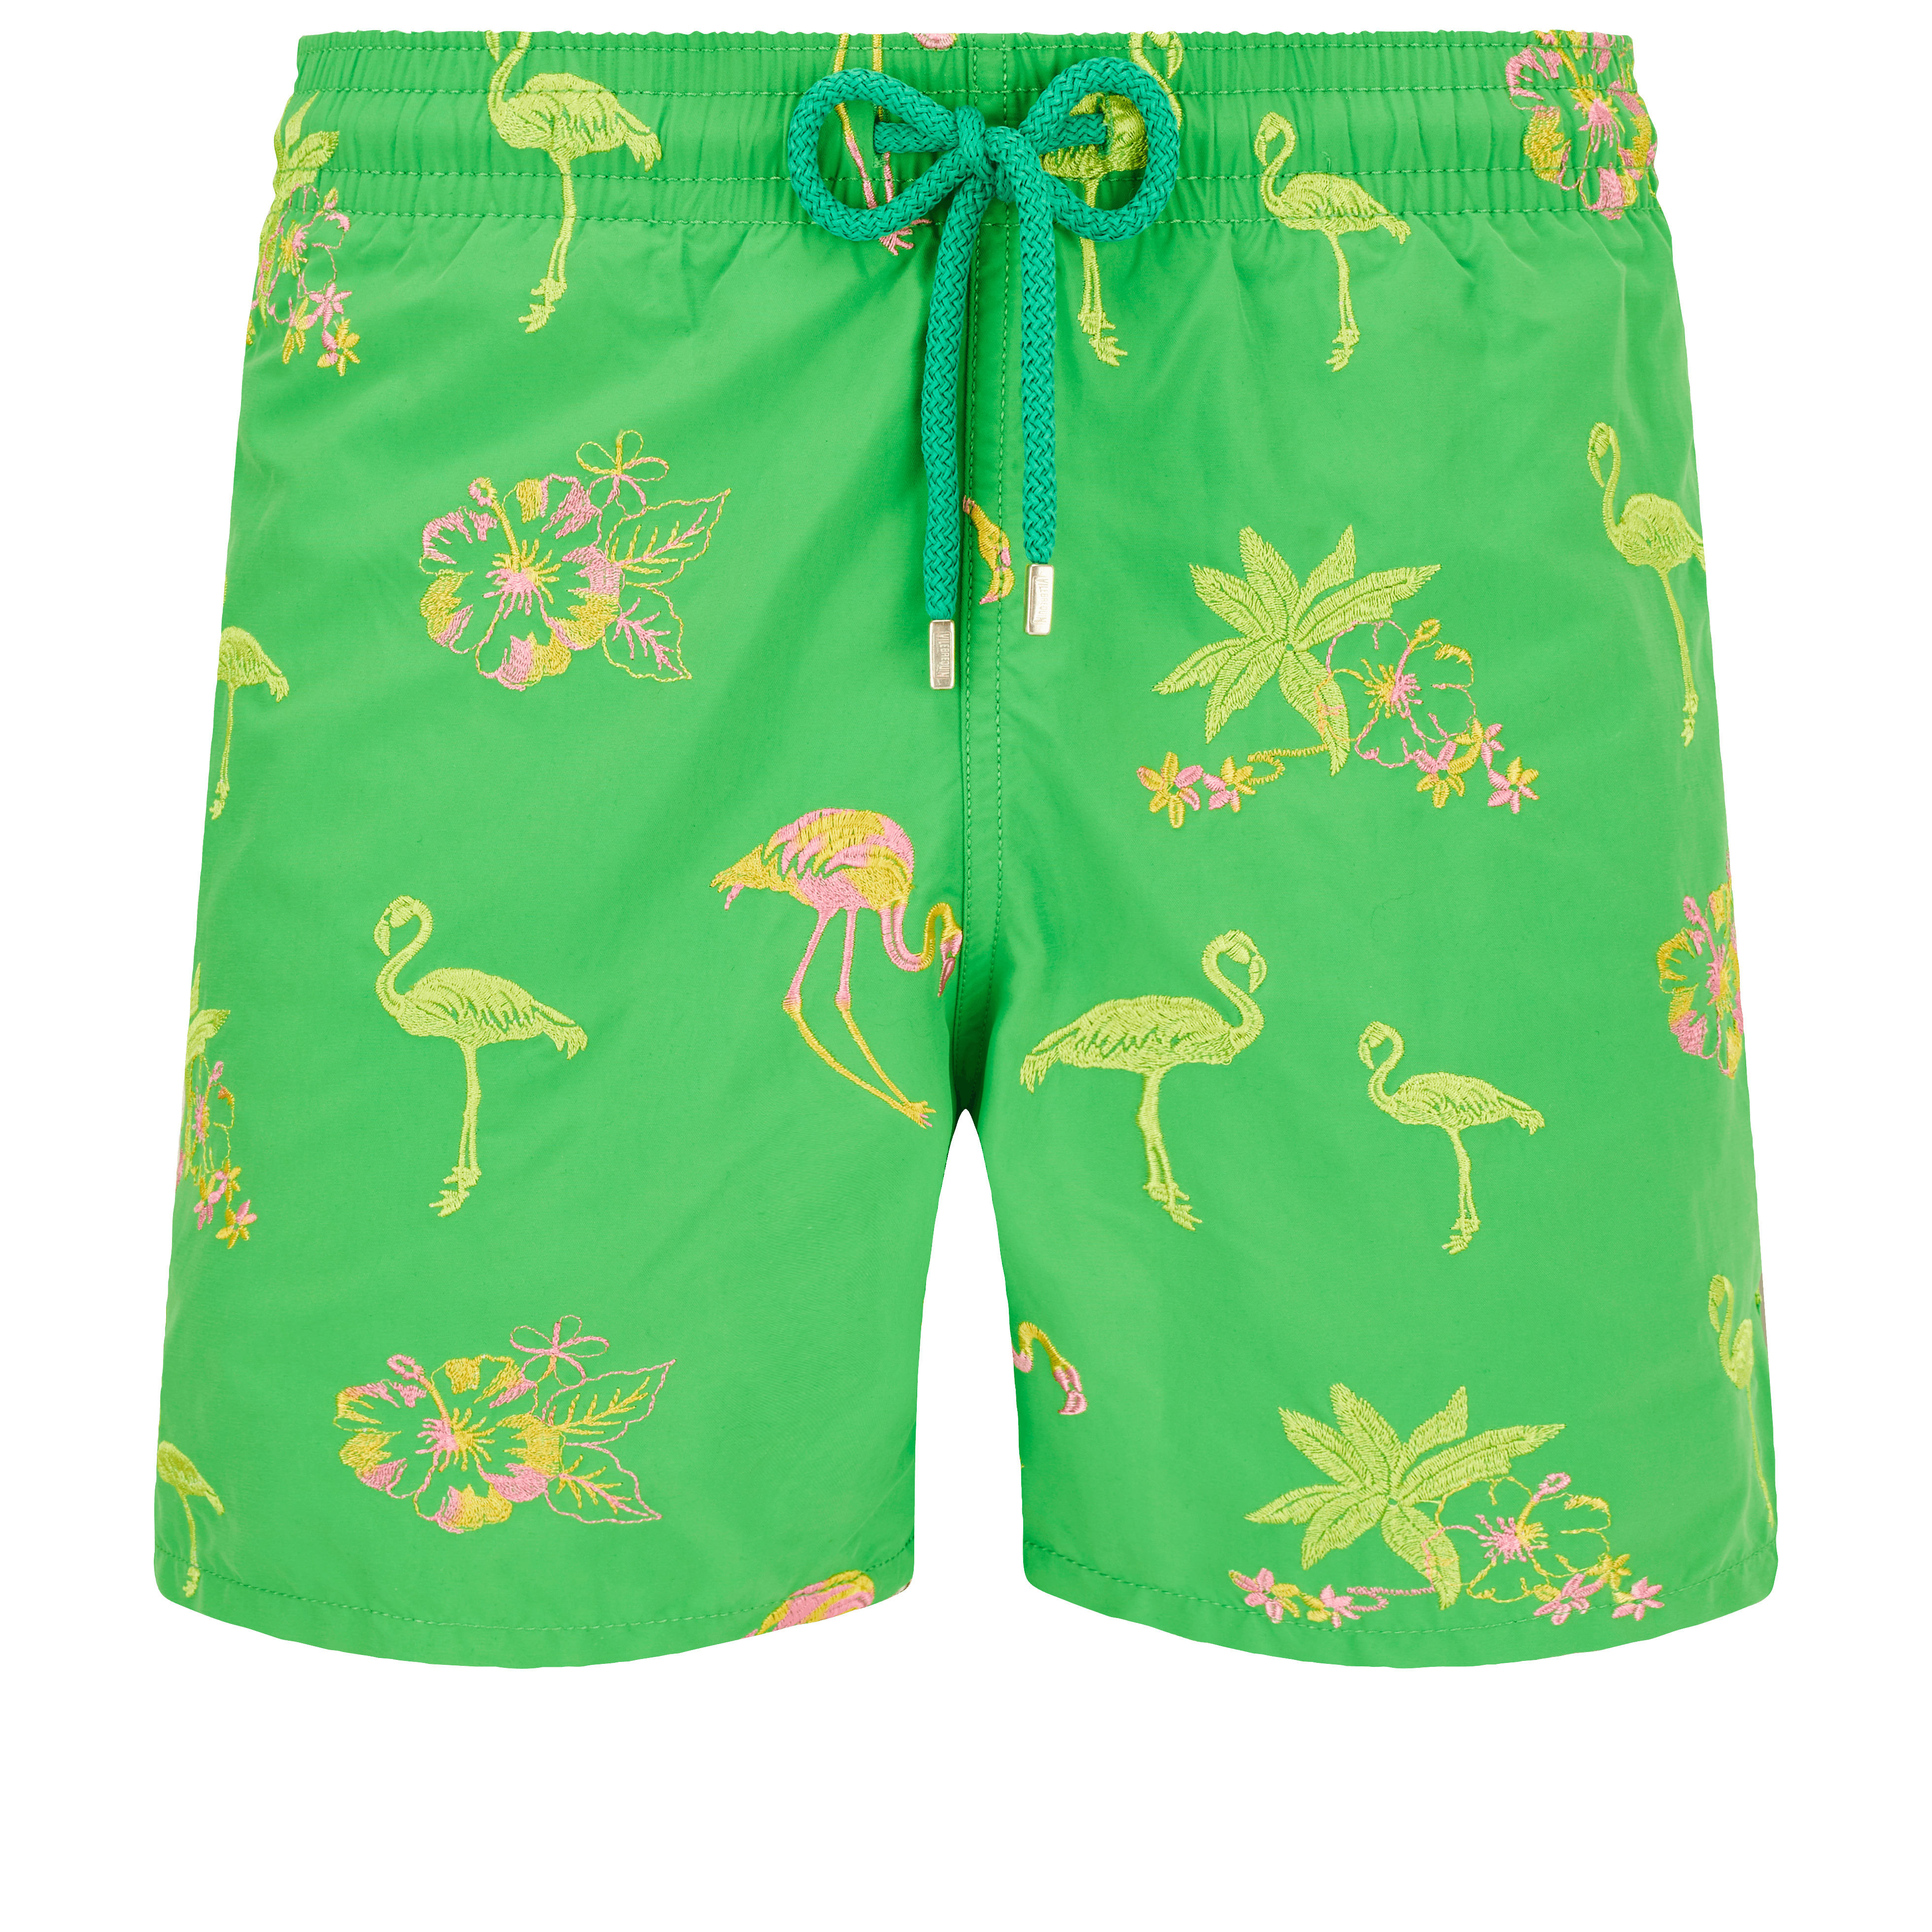 Men Swim Trunks Embroidered 2012 Flamants Rose - Limited Edition - 1